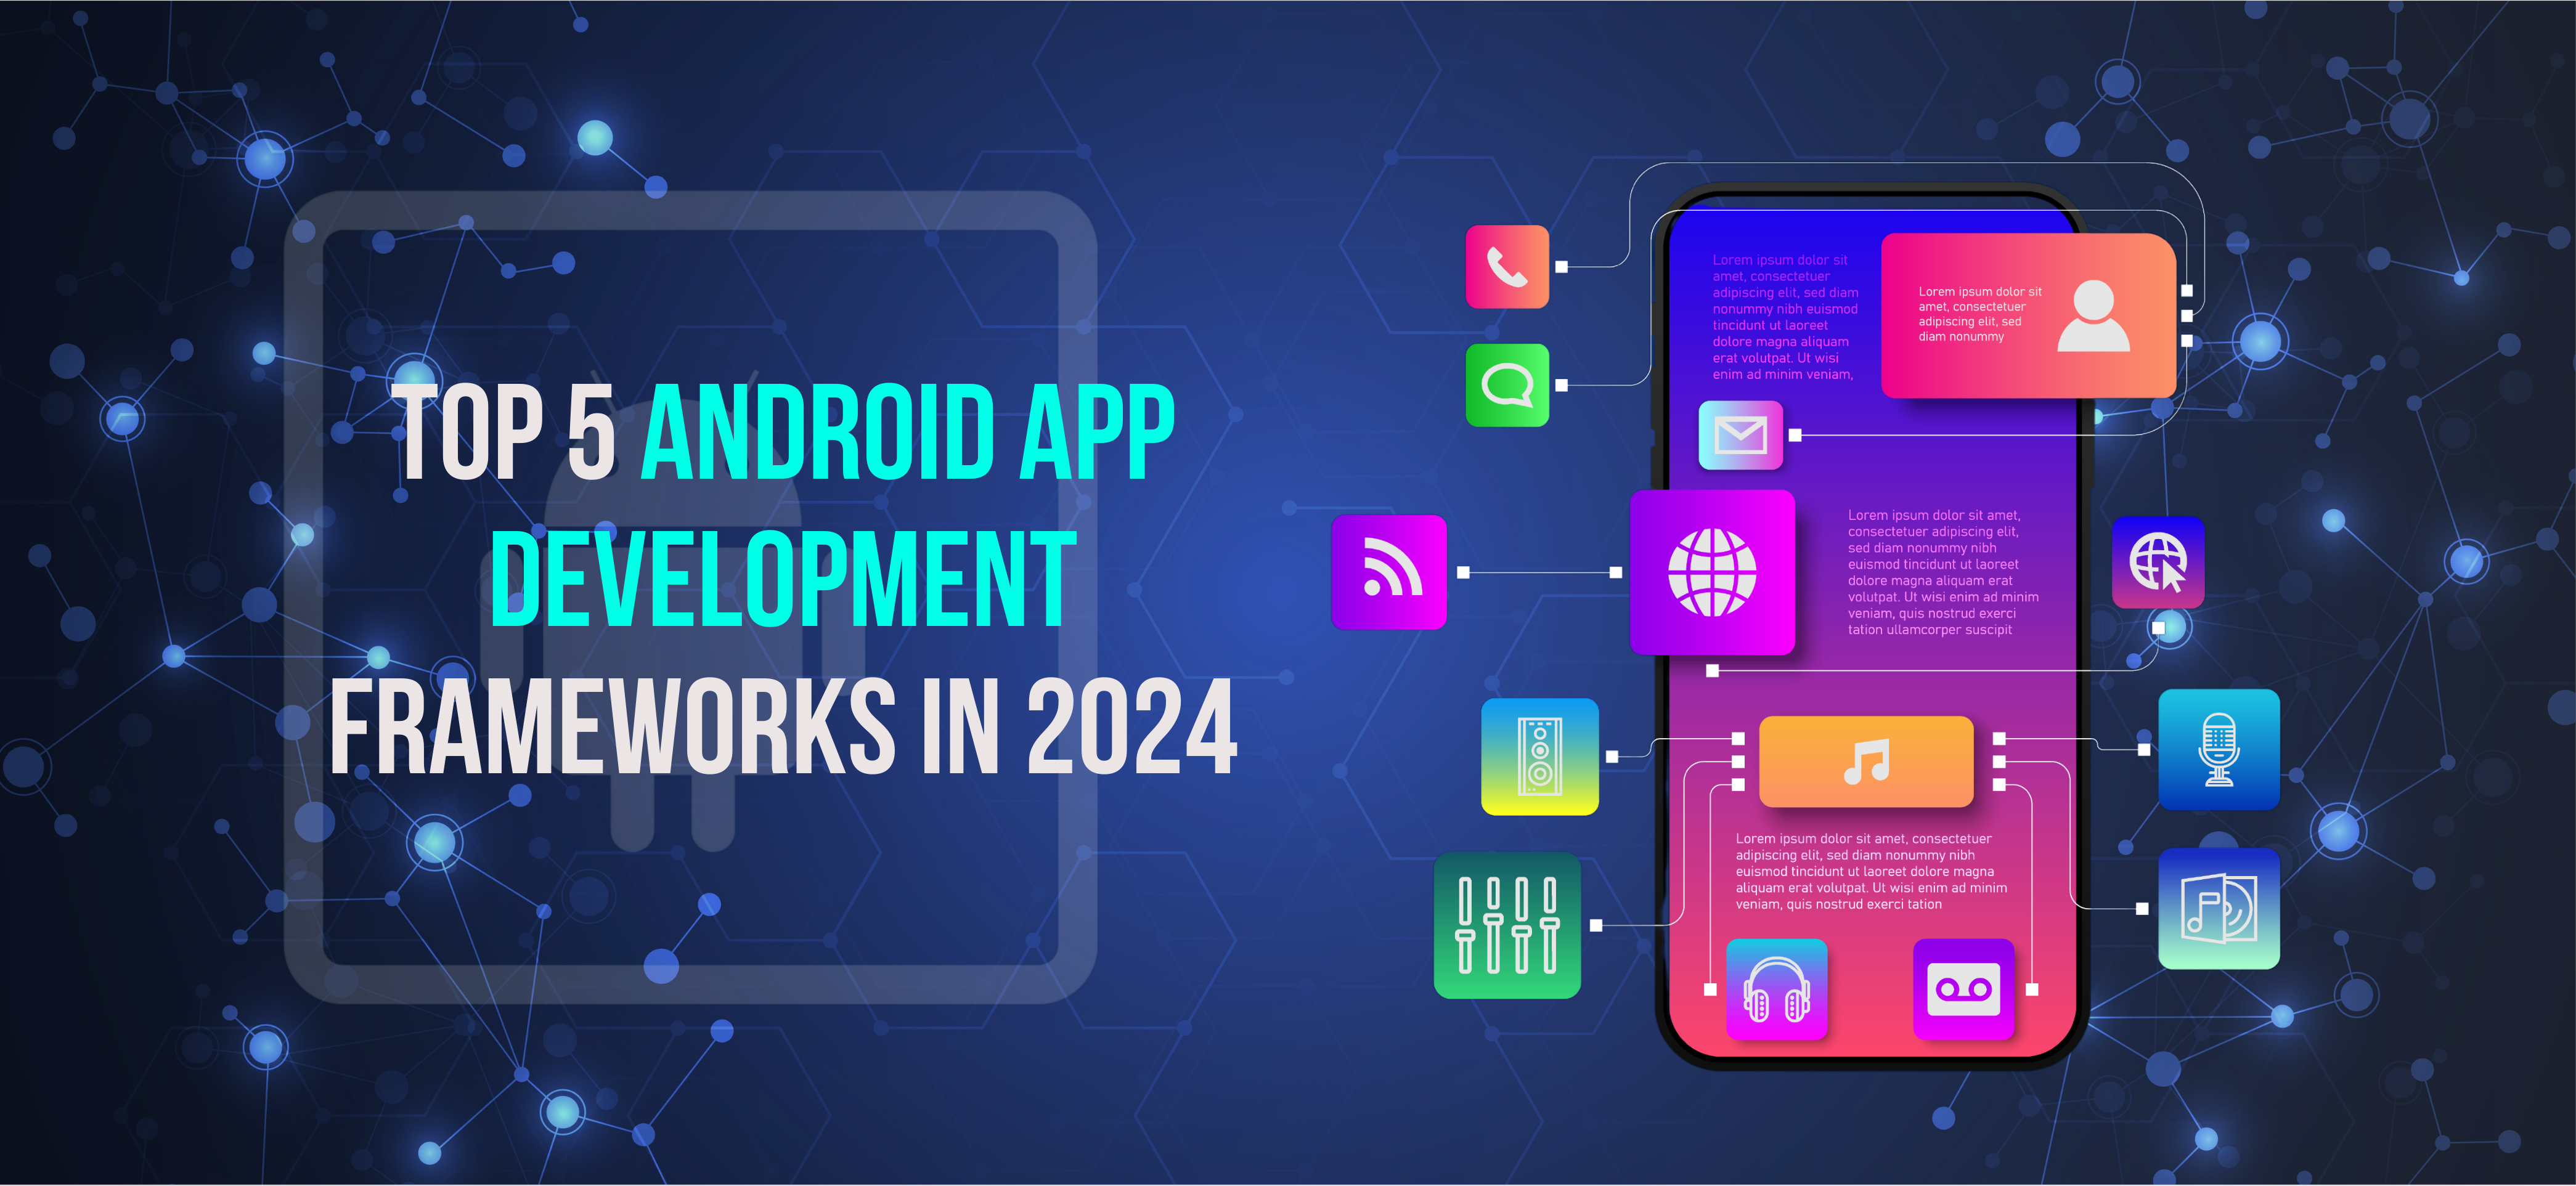 Top 5 Android App Development Frameworks You Should Know in 2024 - Internet Soft